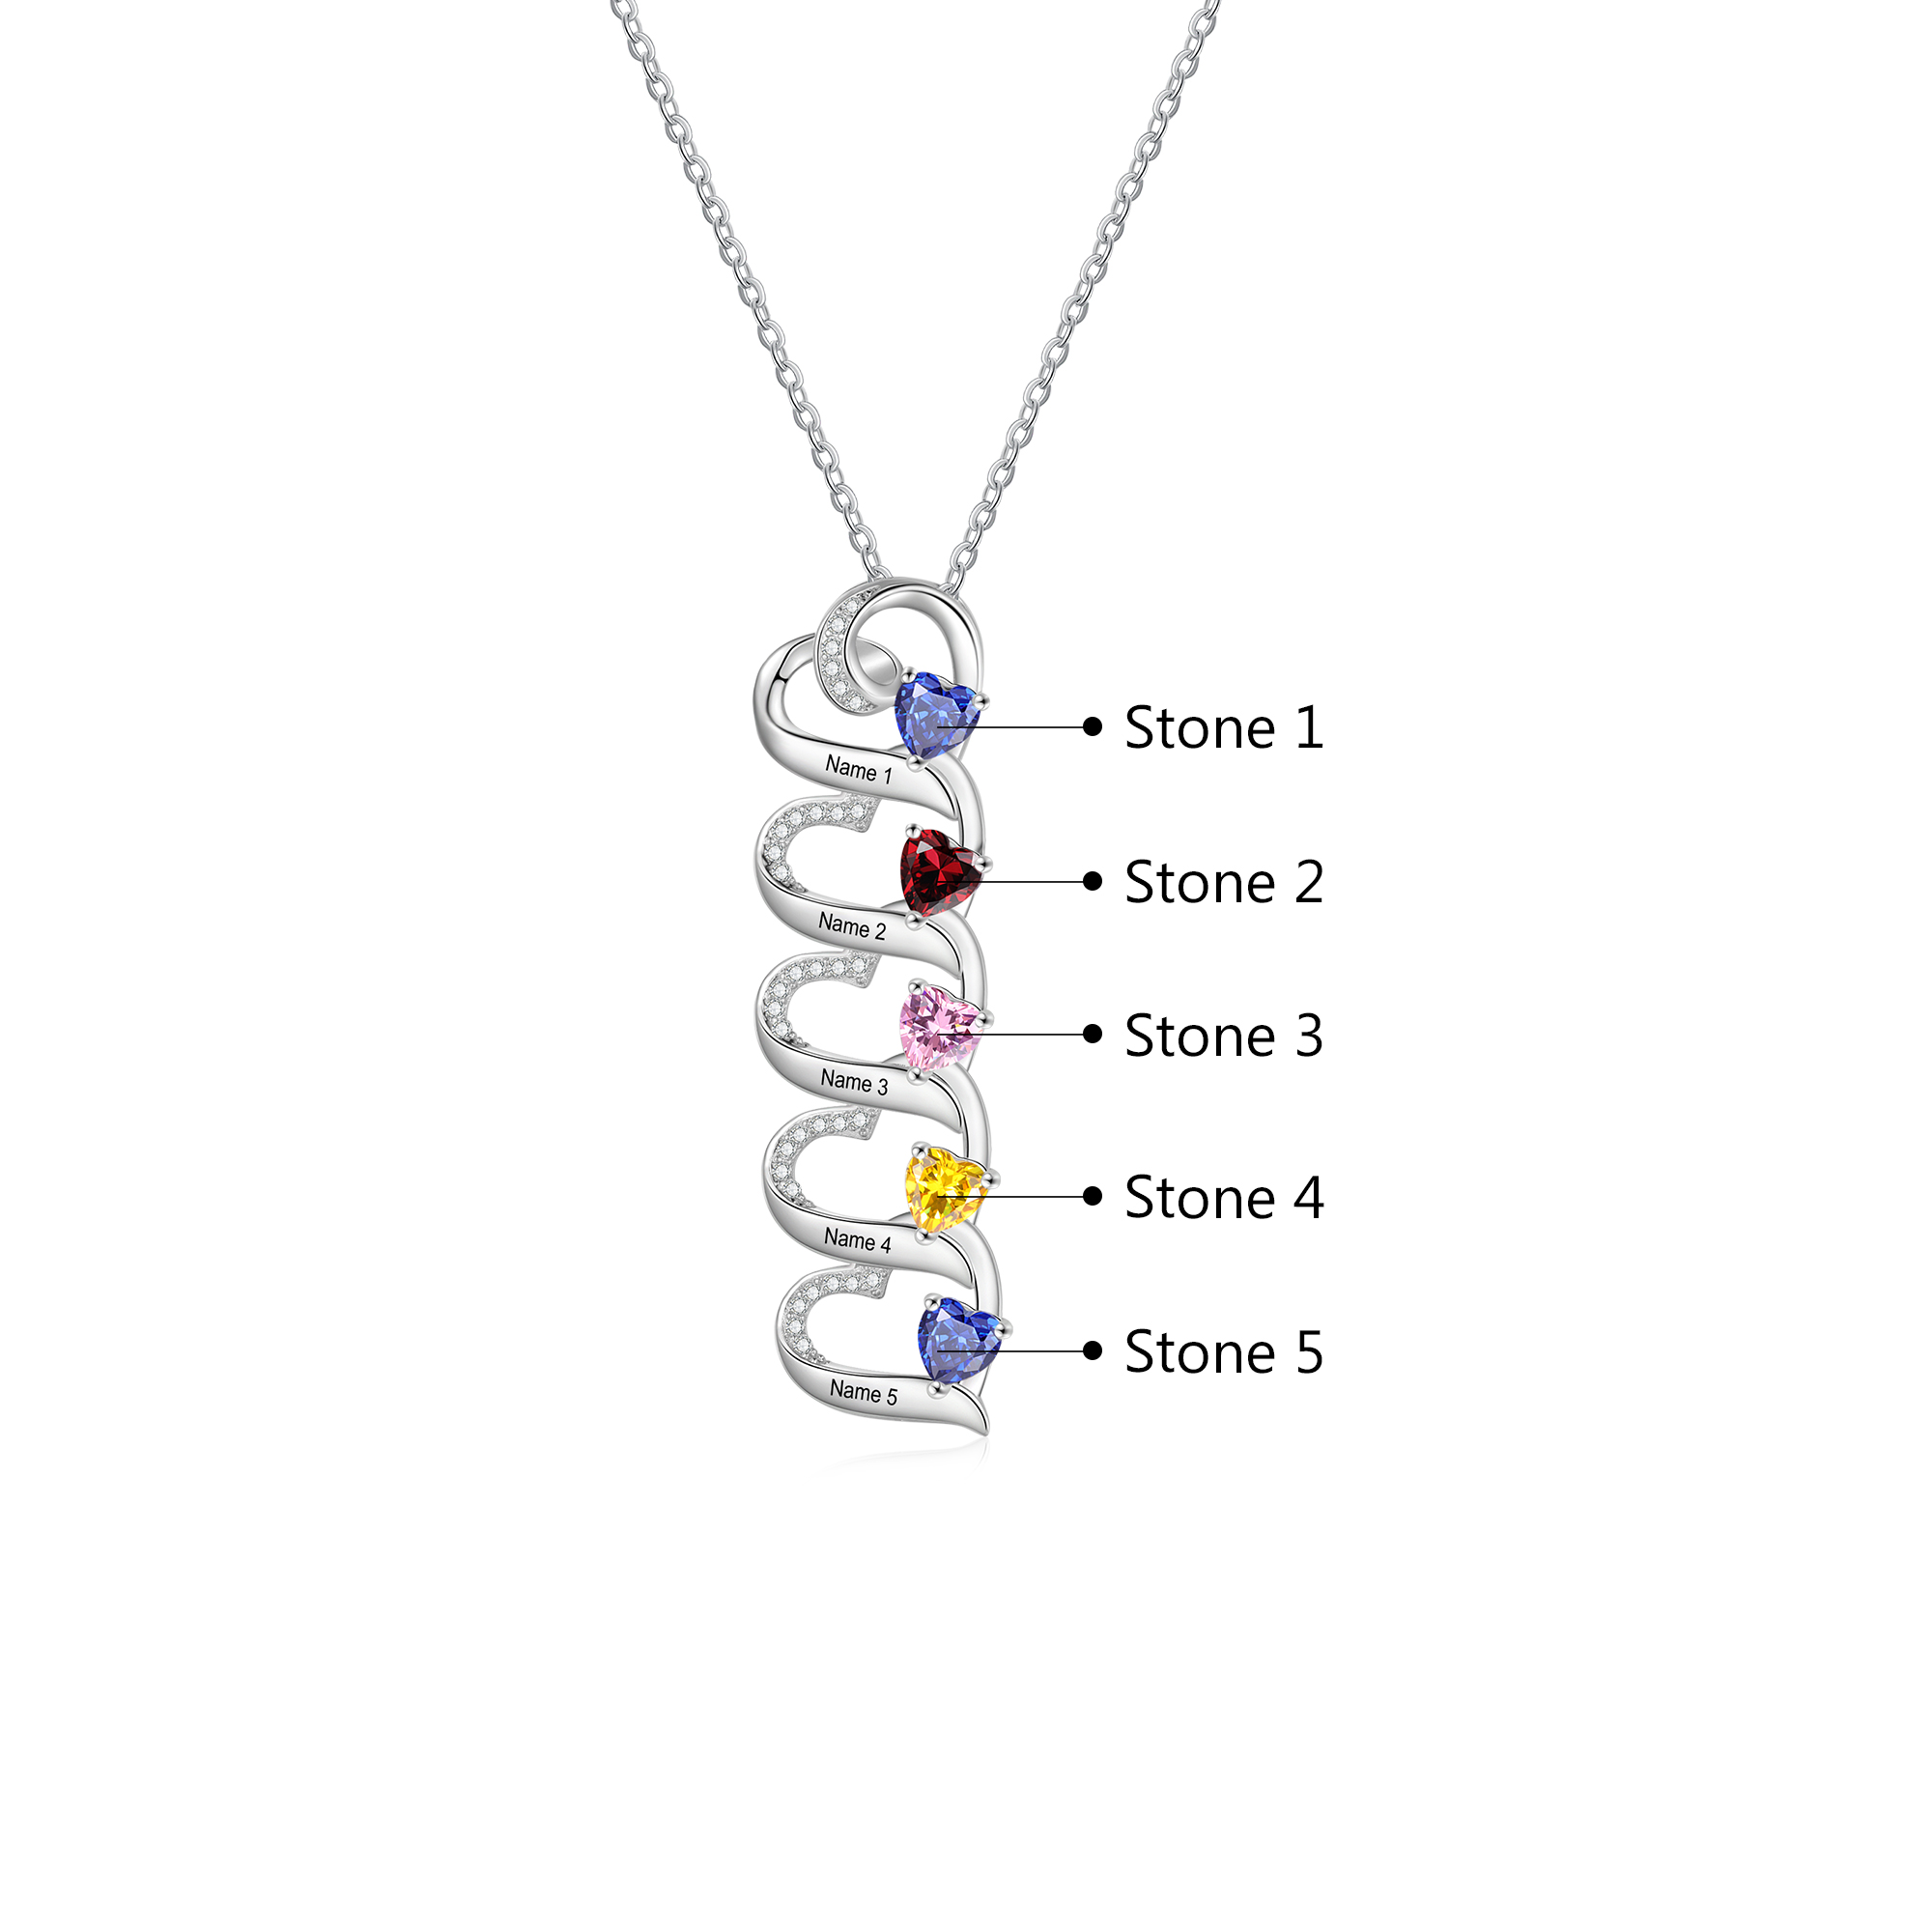 5 Names-Personalized Hearts Necklace Custom Birthstone Necklace Engraved Names Special Gifts for Her